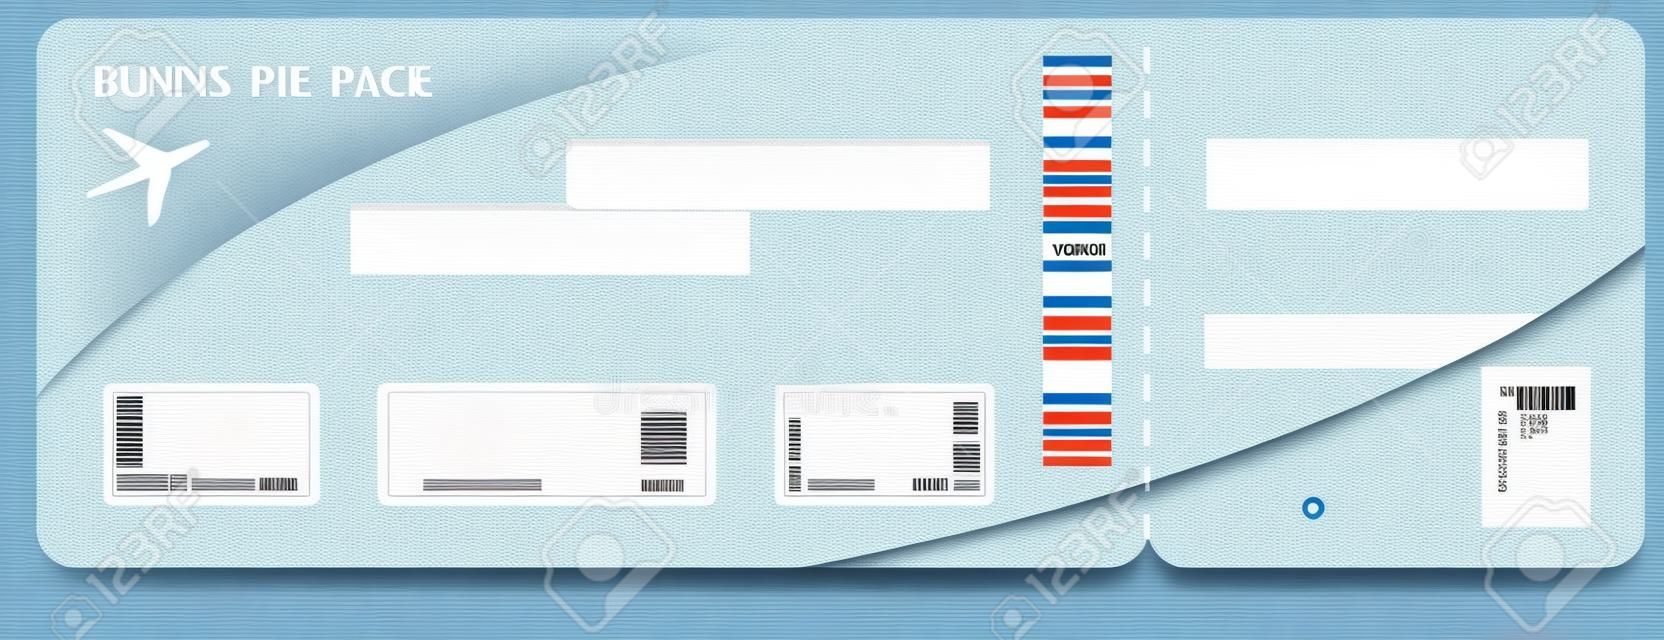 Blank plane ticket for business trip travel or vacation journey isolated vector illustration